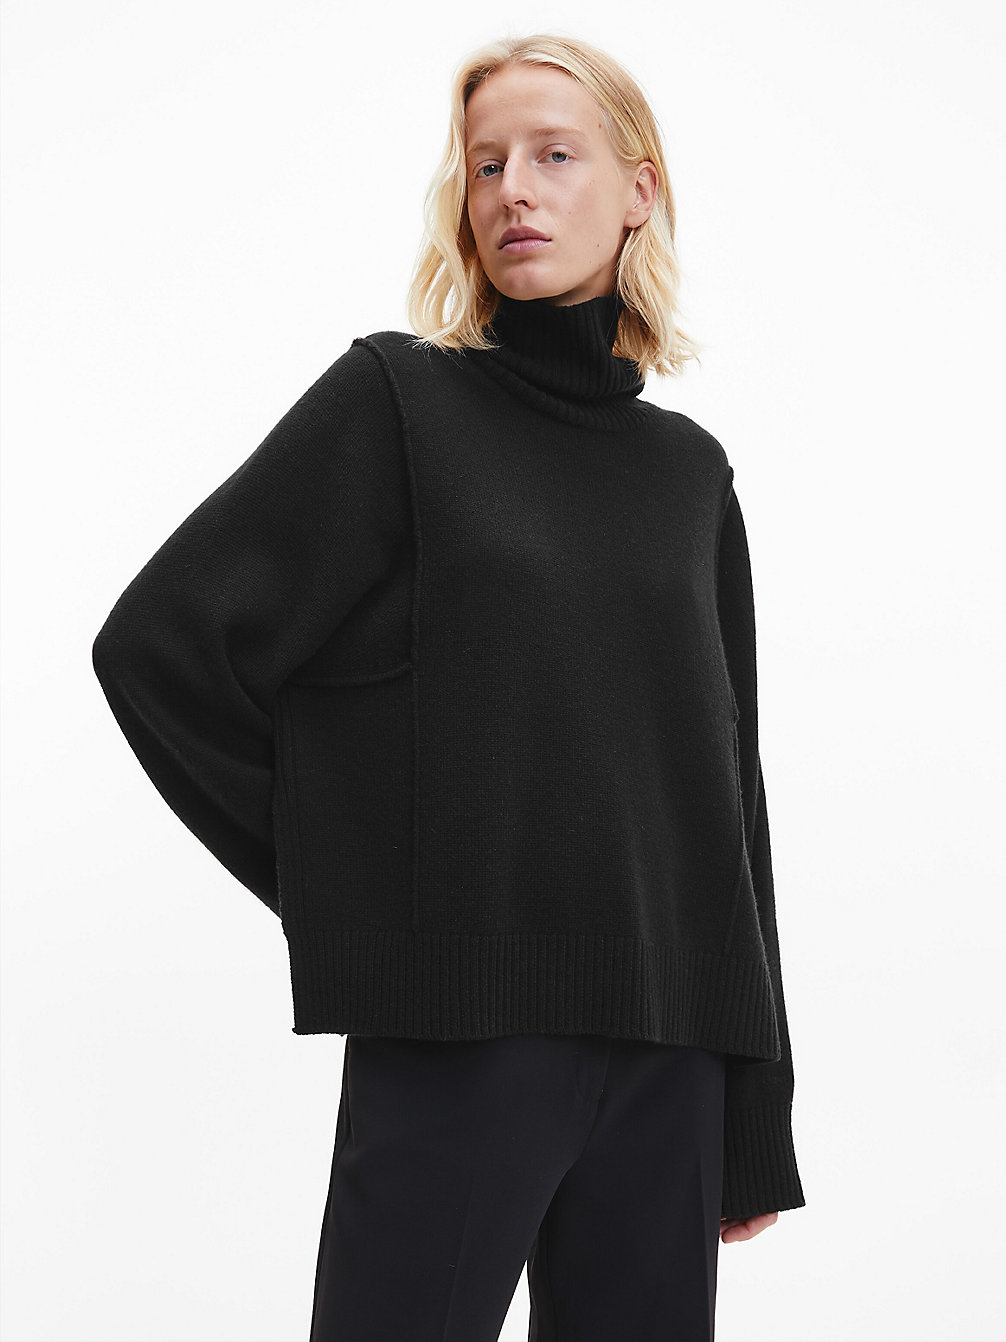 CK BLACK Relaxed Recycled Wool Jumper undefined women Calvin Klein